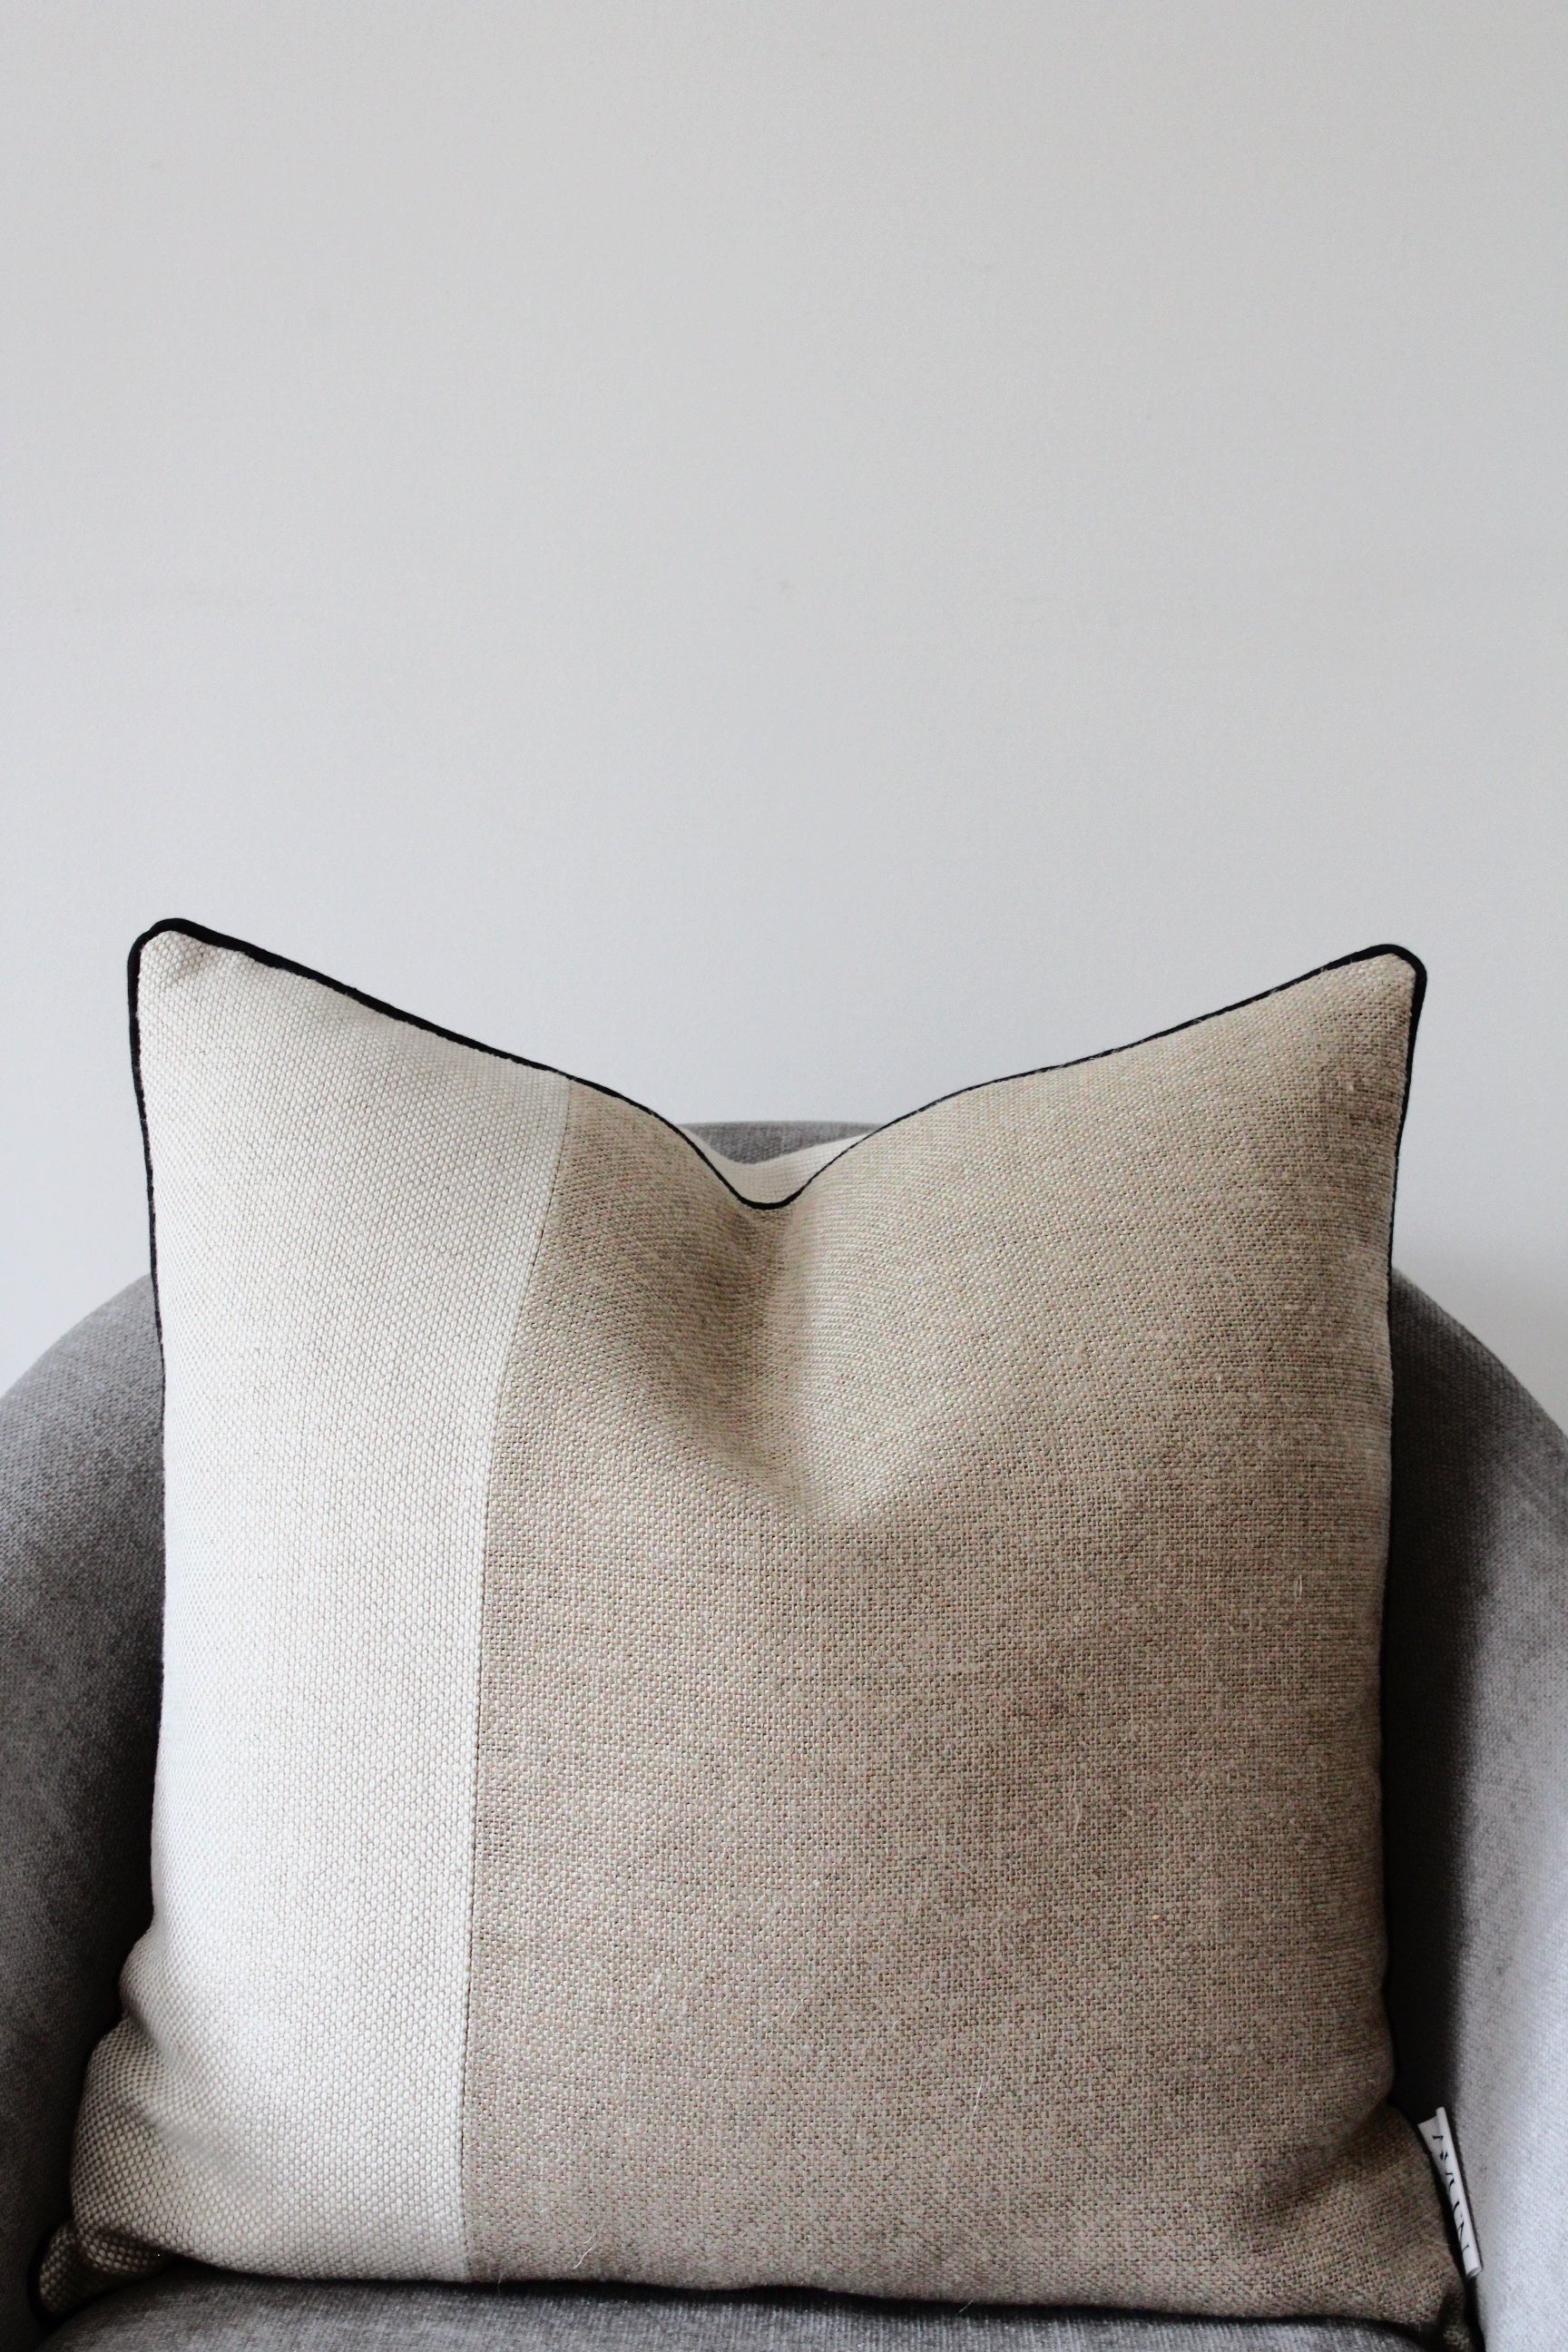 Pure flax linen cushion cover in classic rustic heavy weight linen in oatmeal beige and sand colour. Contrasting block stripe design with modern black piping edge